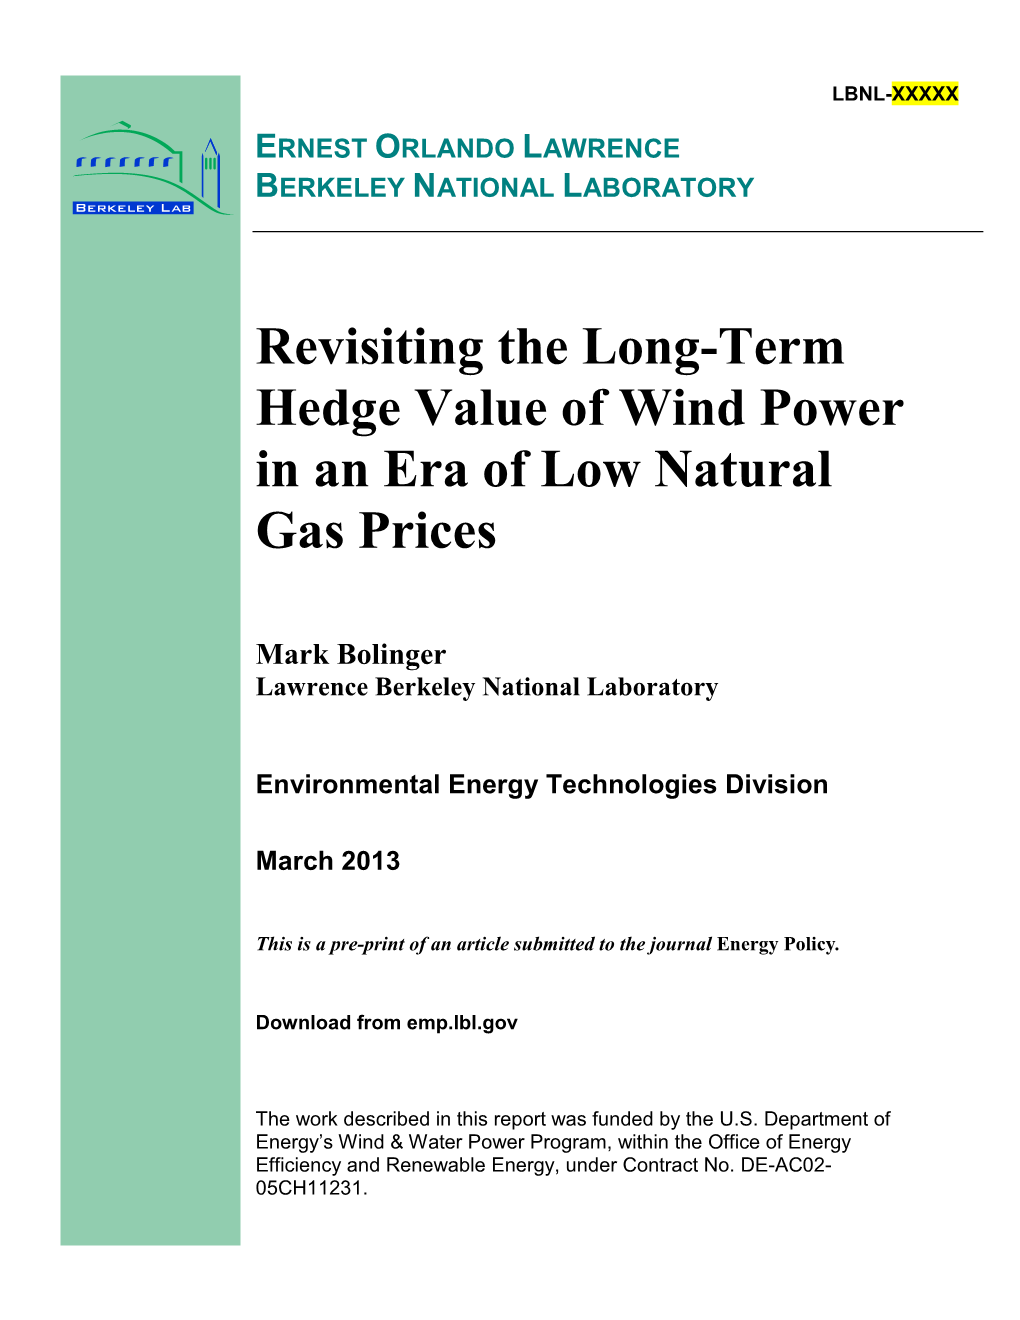 Revisiting the Long-Term Hedge Value of Wind Power in an Era of Low Natural Gas Prices